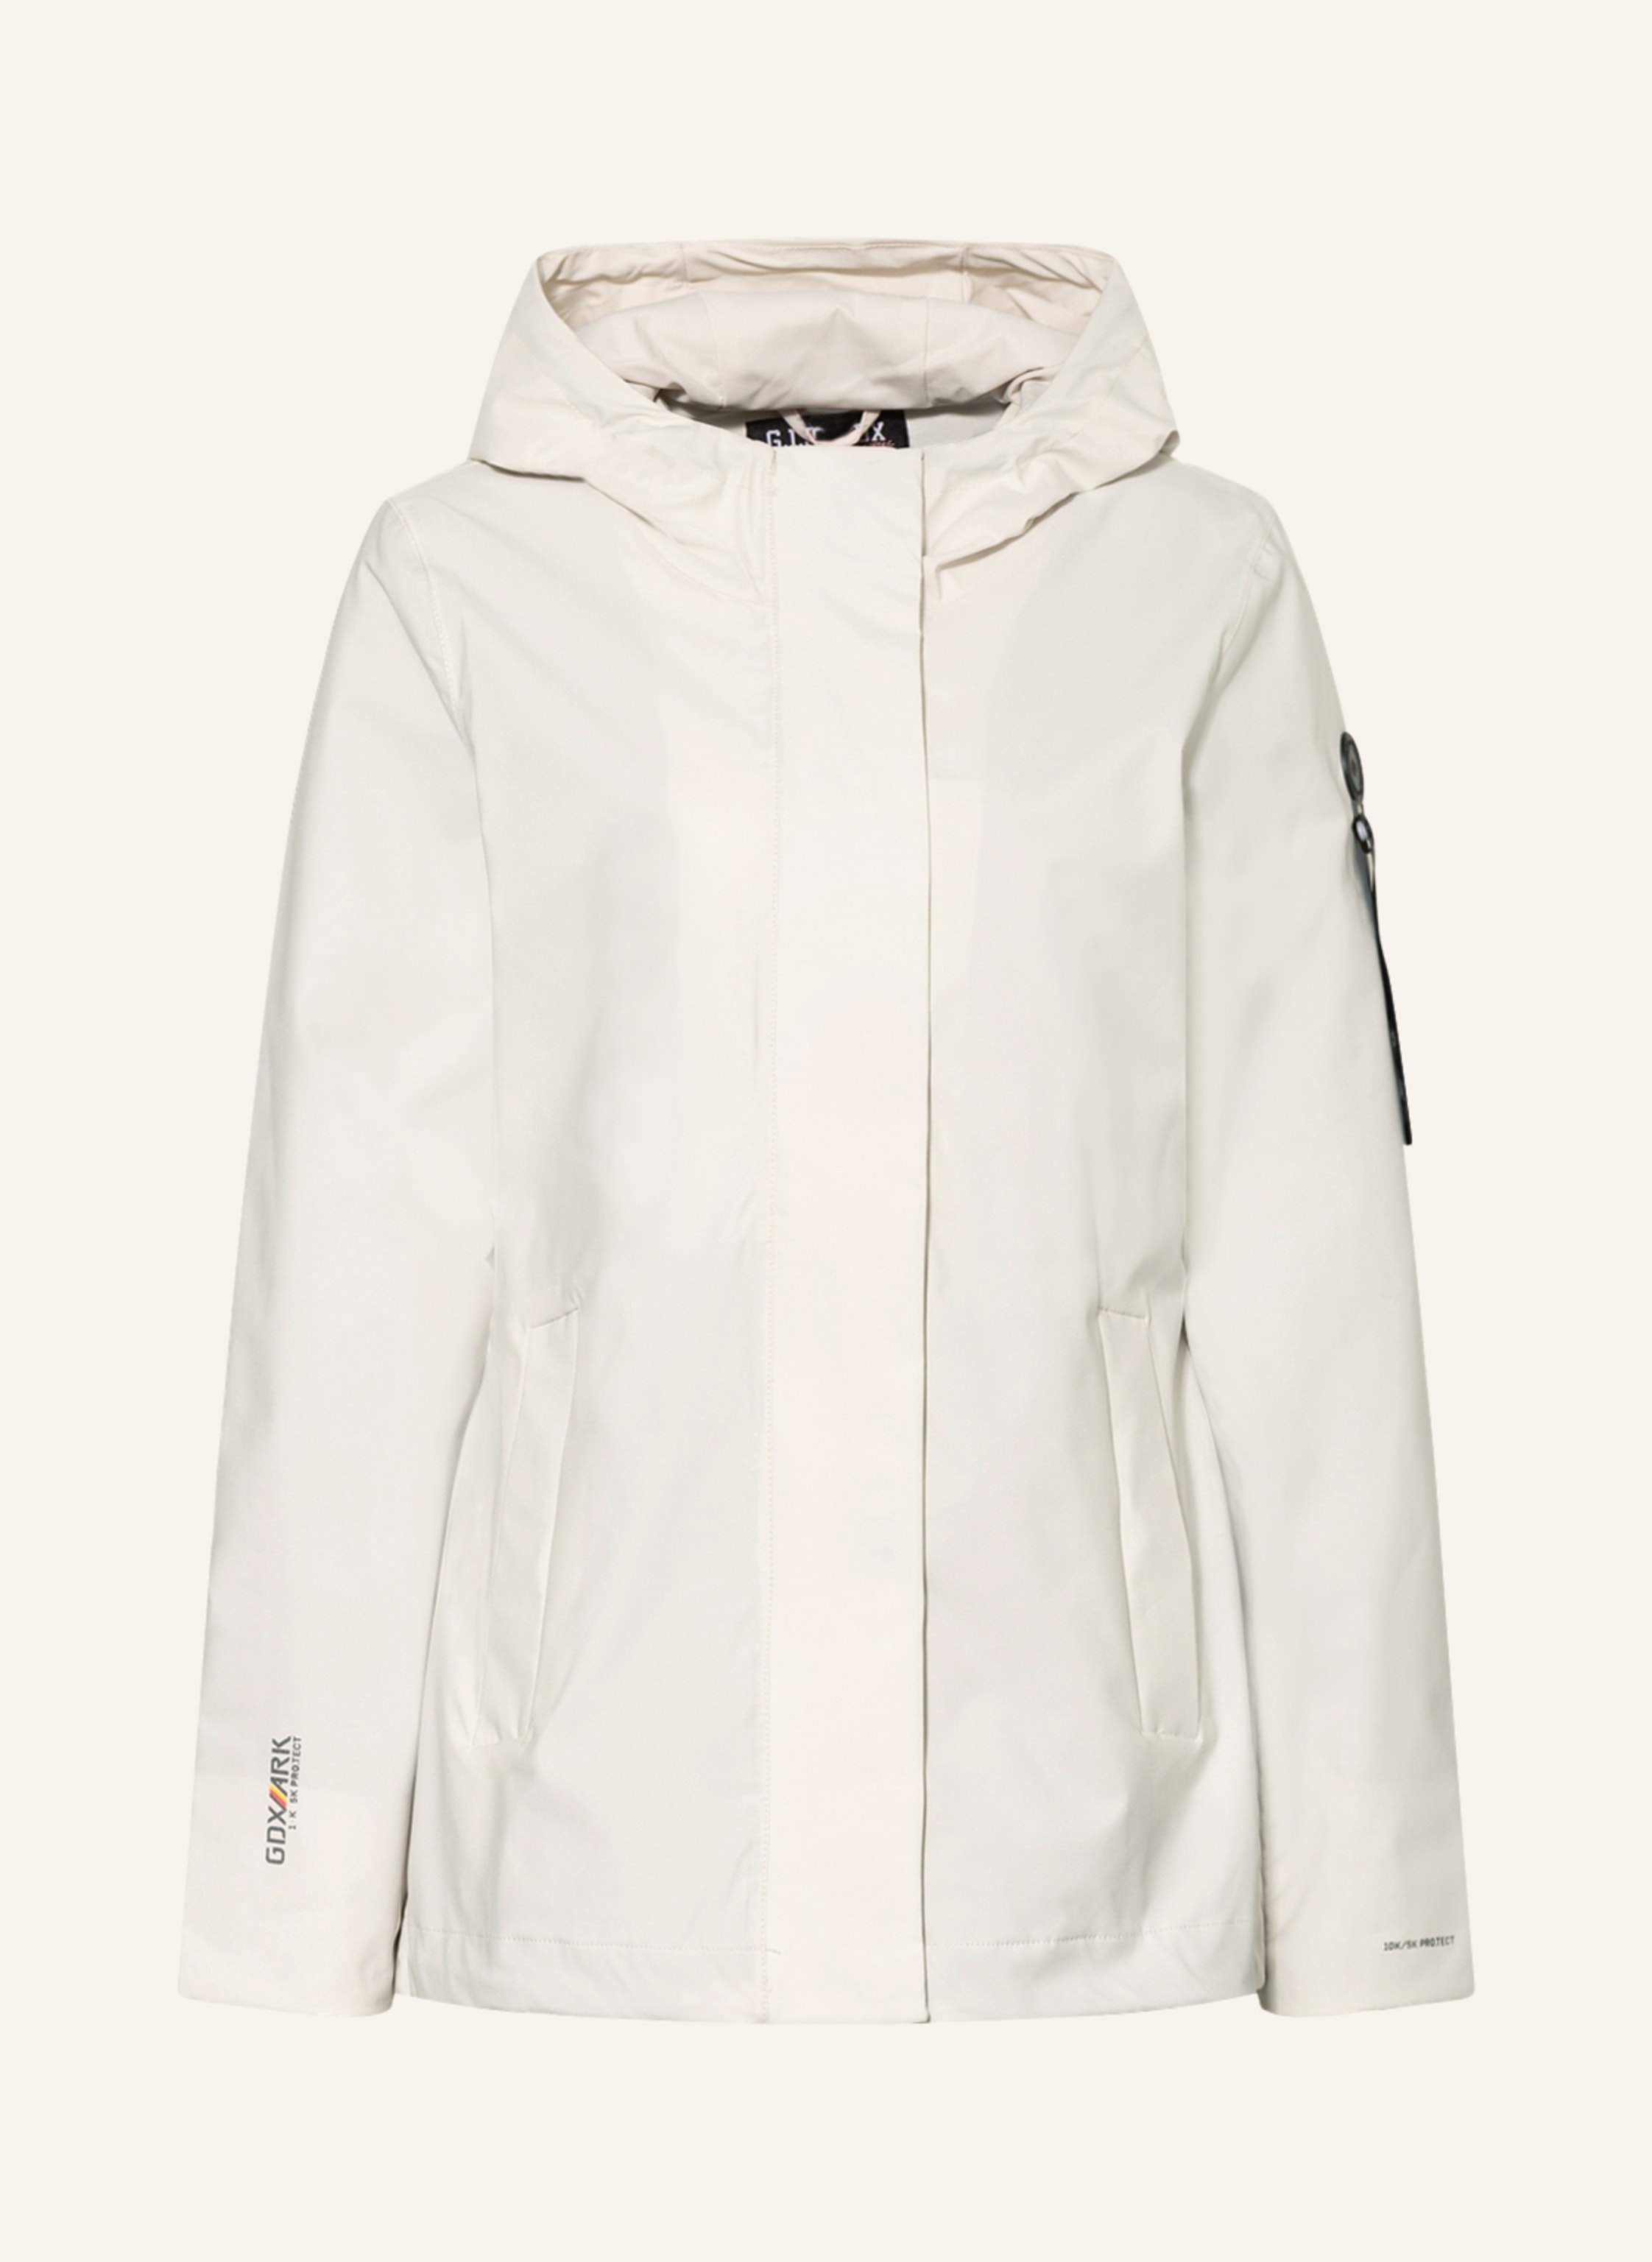 G.I.G.A. DX by Outdoor 152 in cream killtec jacket GS